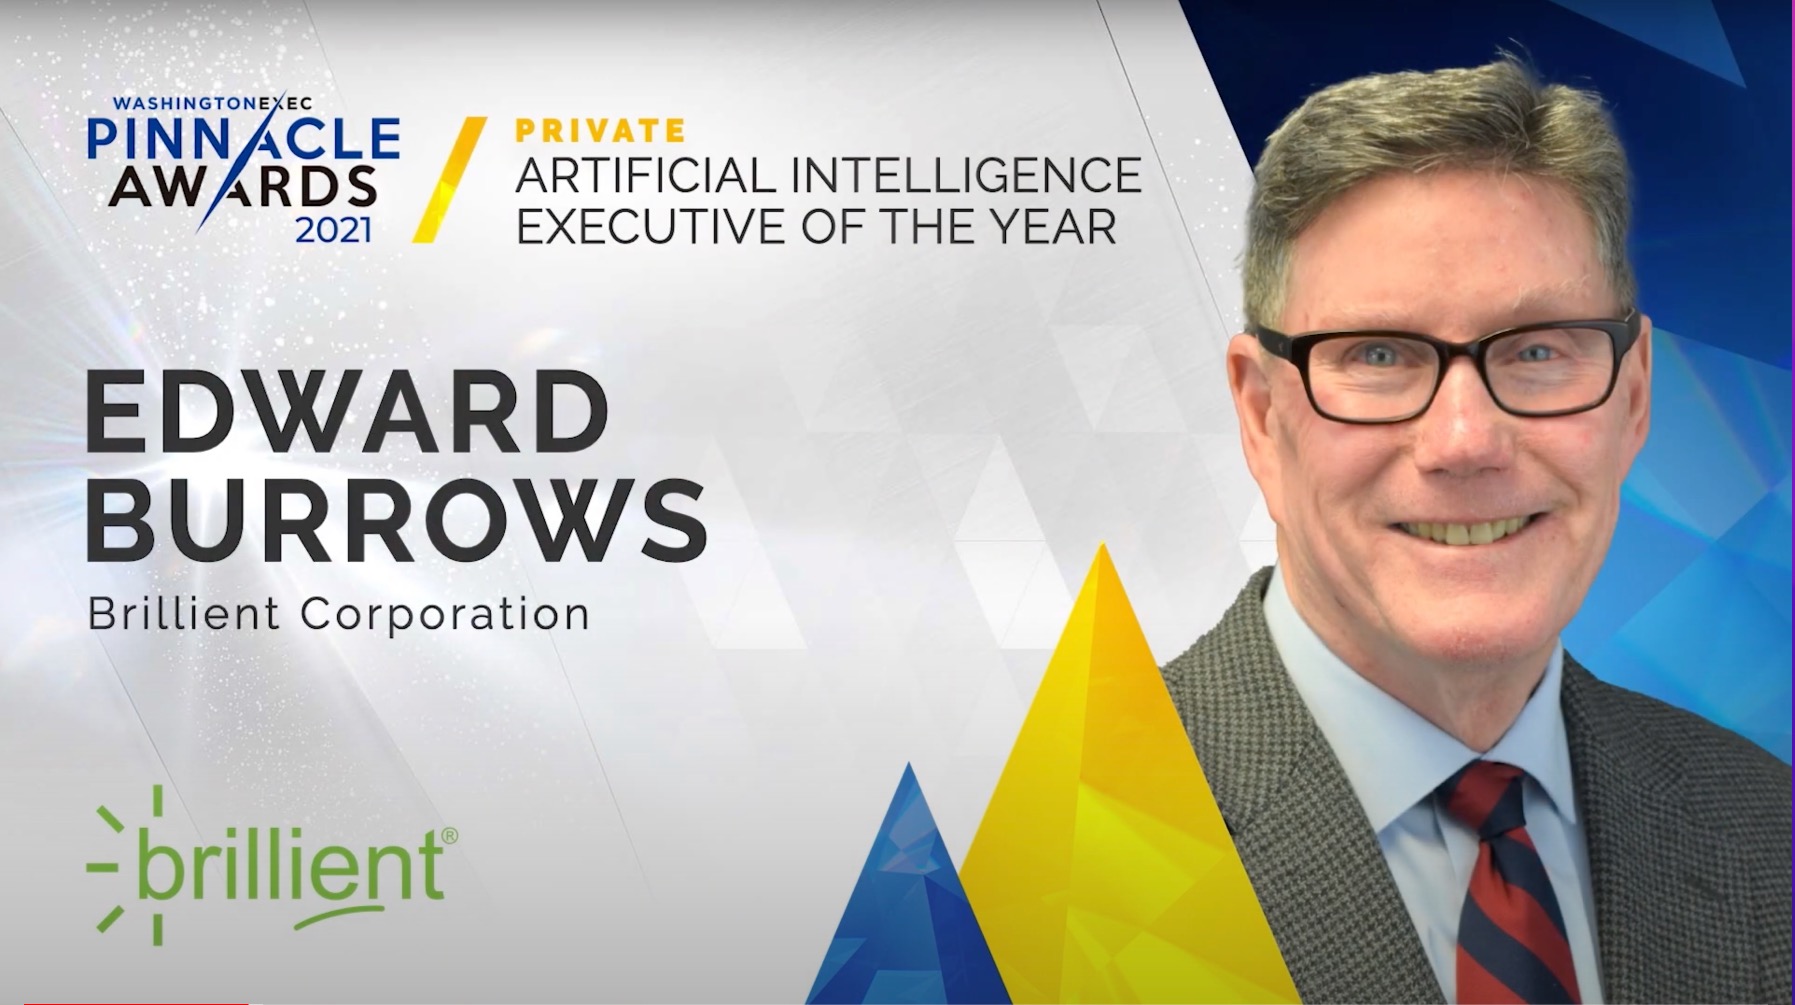 AI - Congratulations to Edward Burrows from Brillient Corporation on winning the award for Artificial Intelligence Executive of the Year in the Private Sector